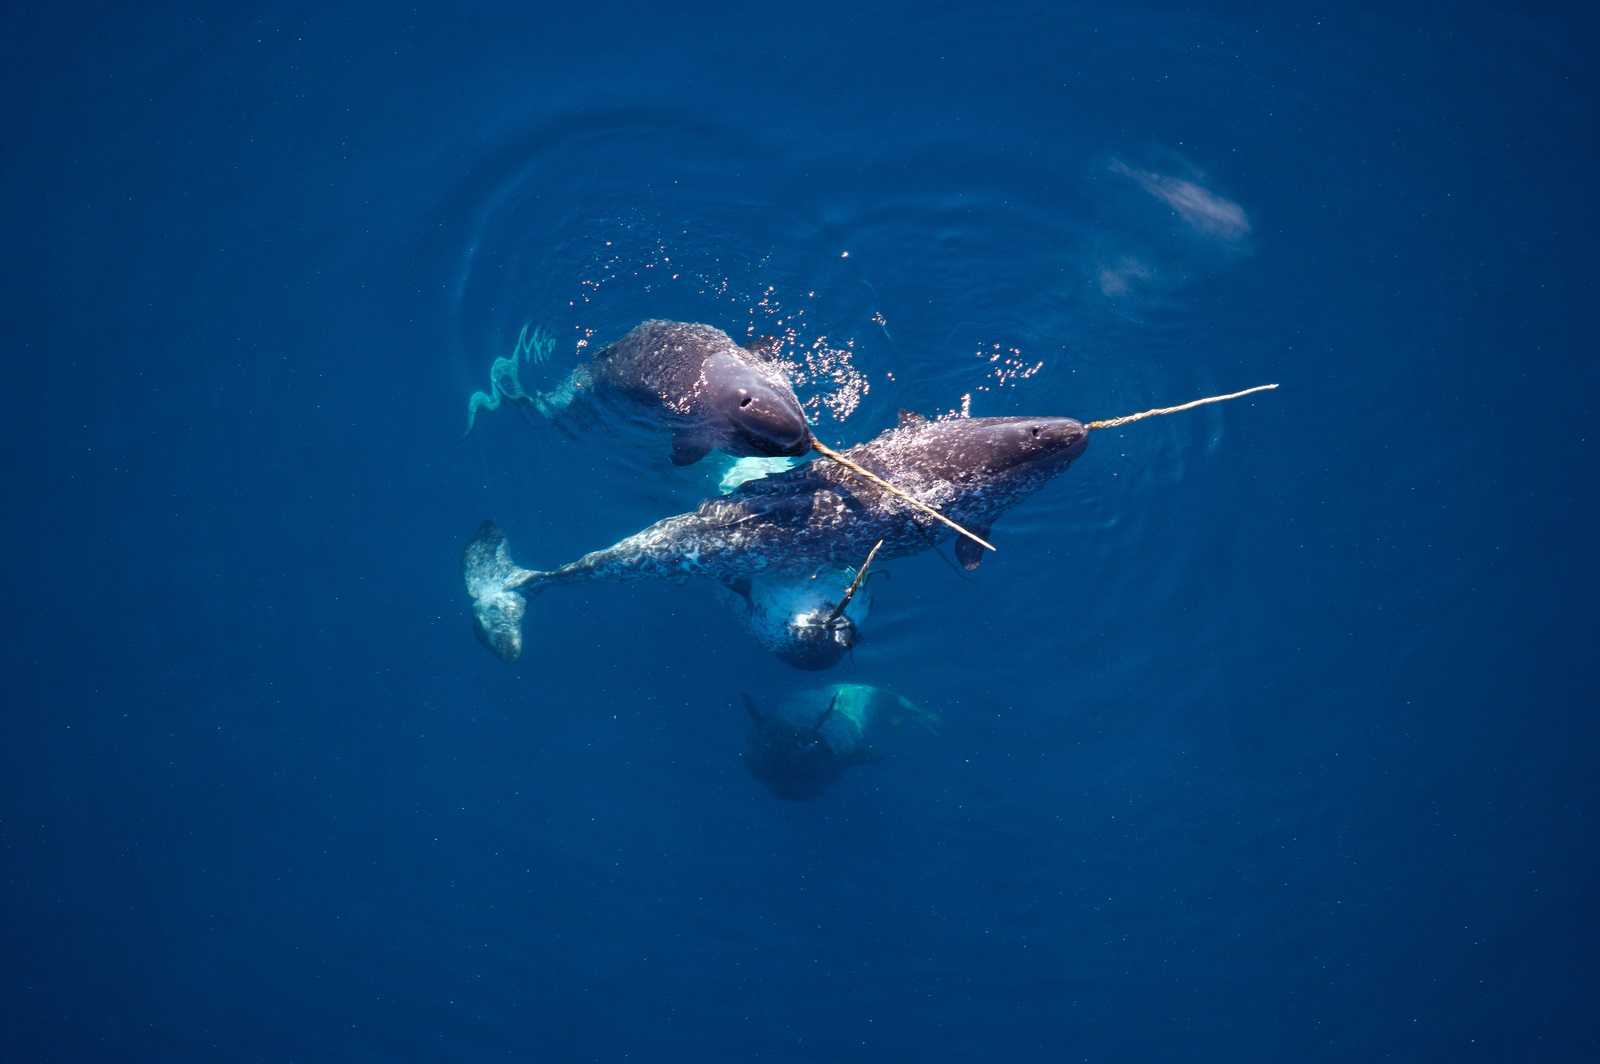 Photos of narwhals in the water